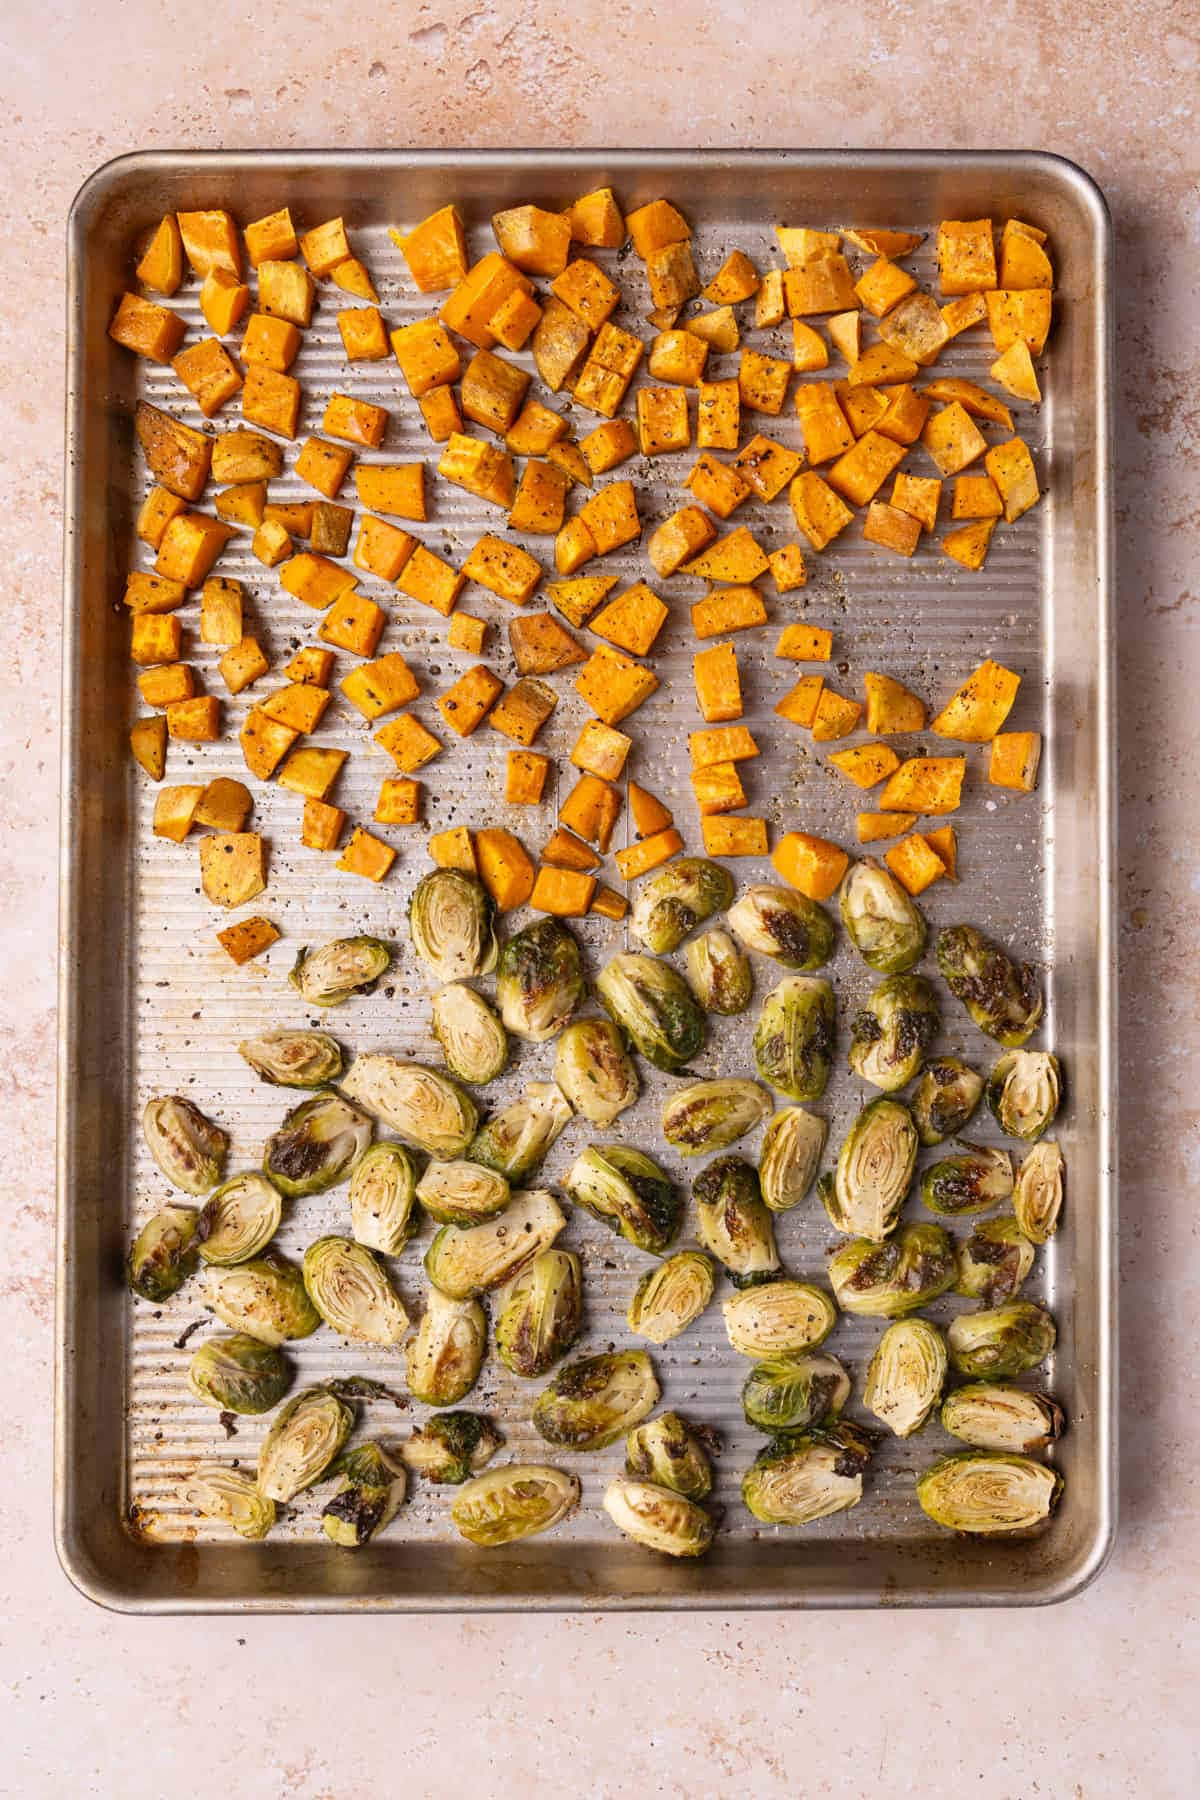 Baking Tray with Freshly Roasted Sweet Potatoes and Brussels Sprouts